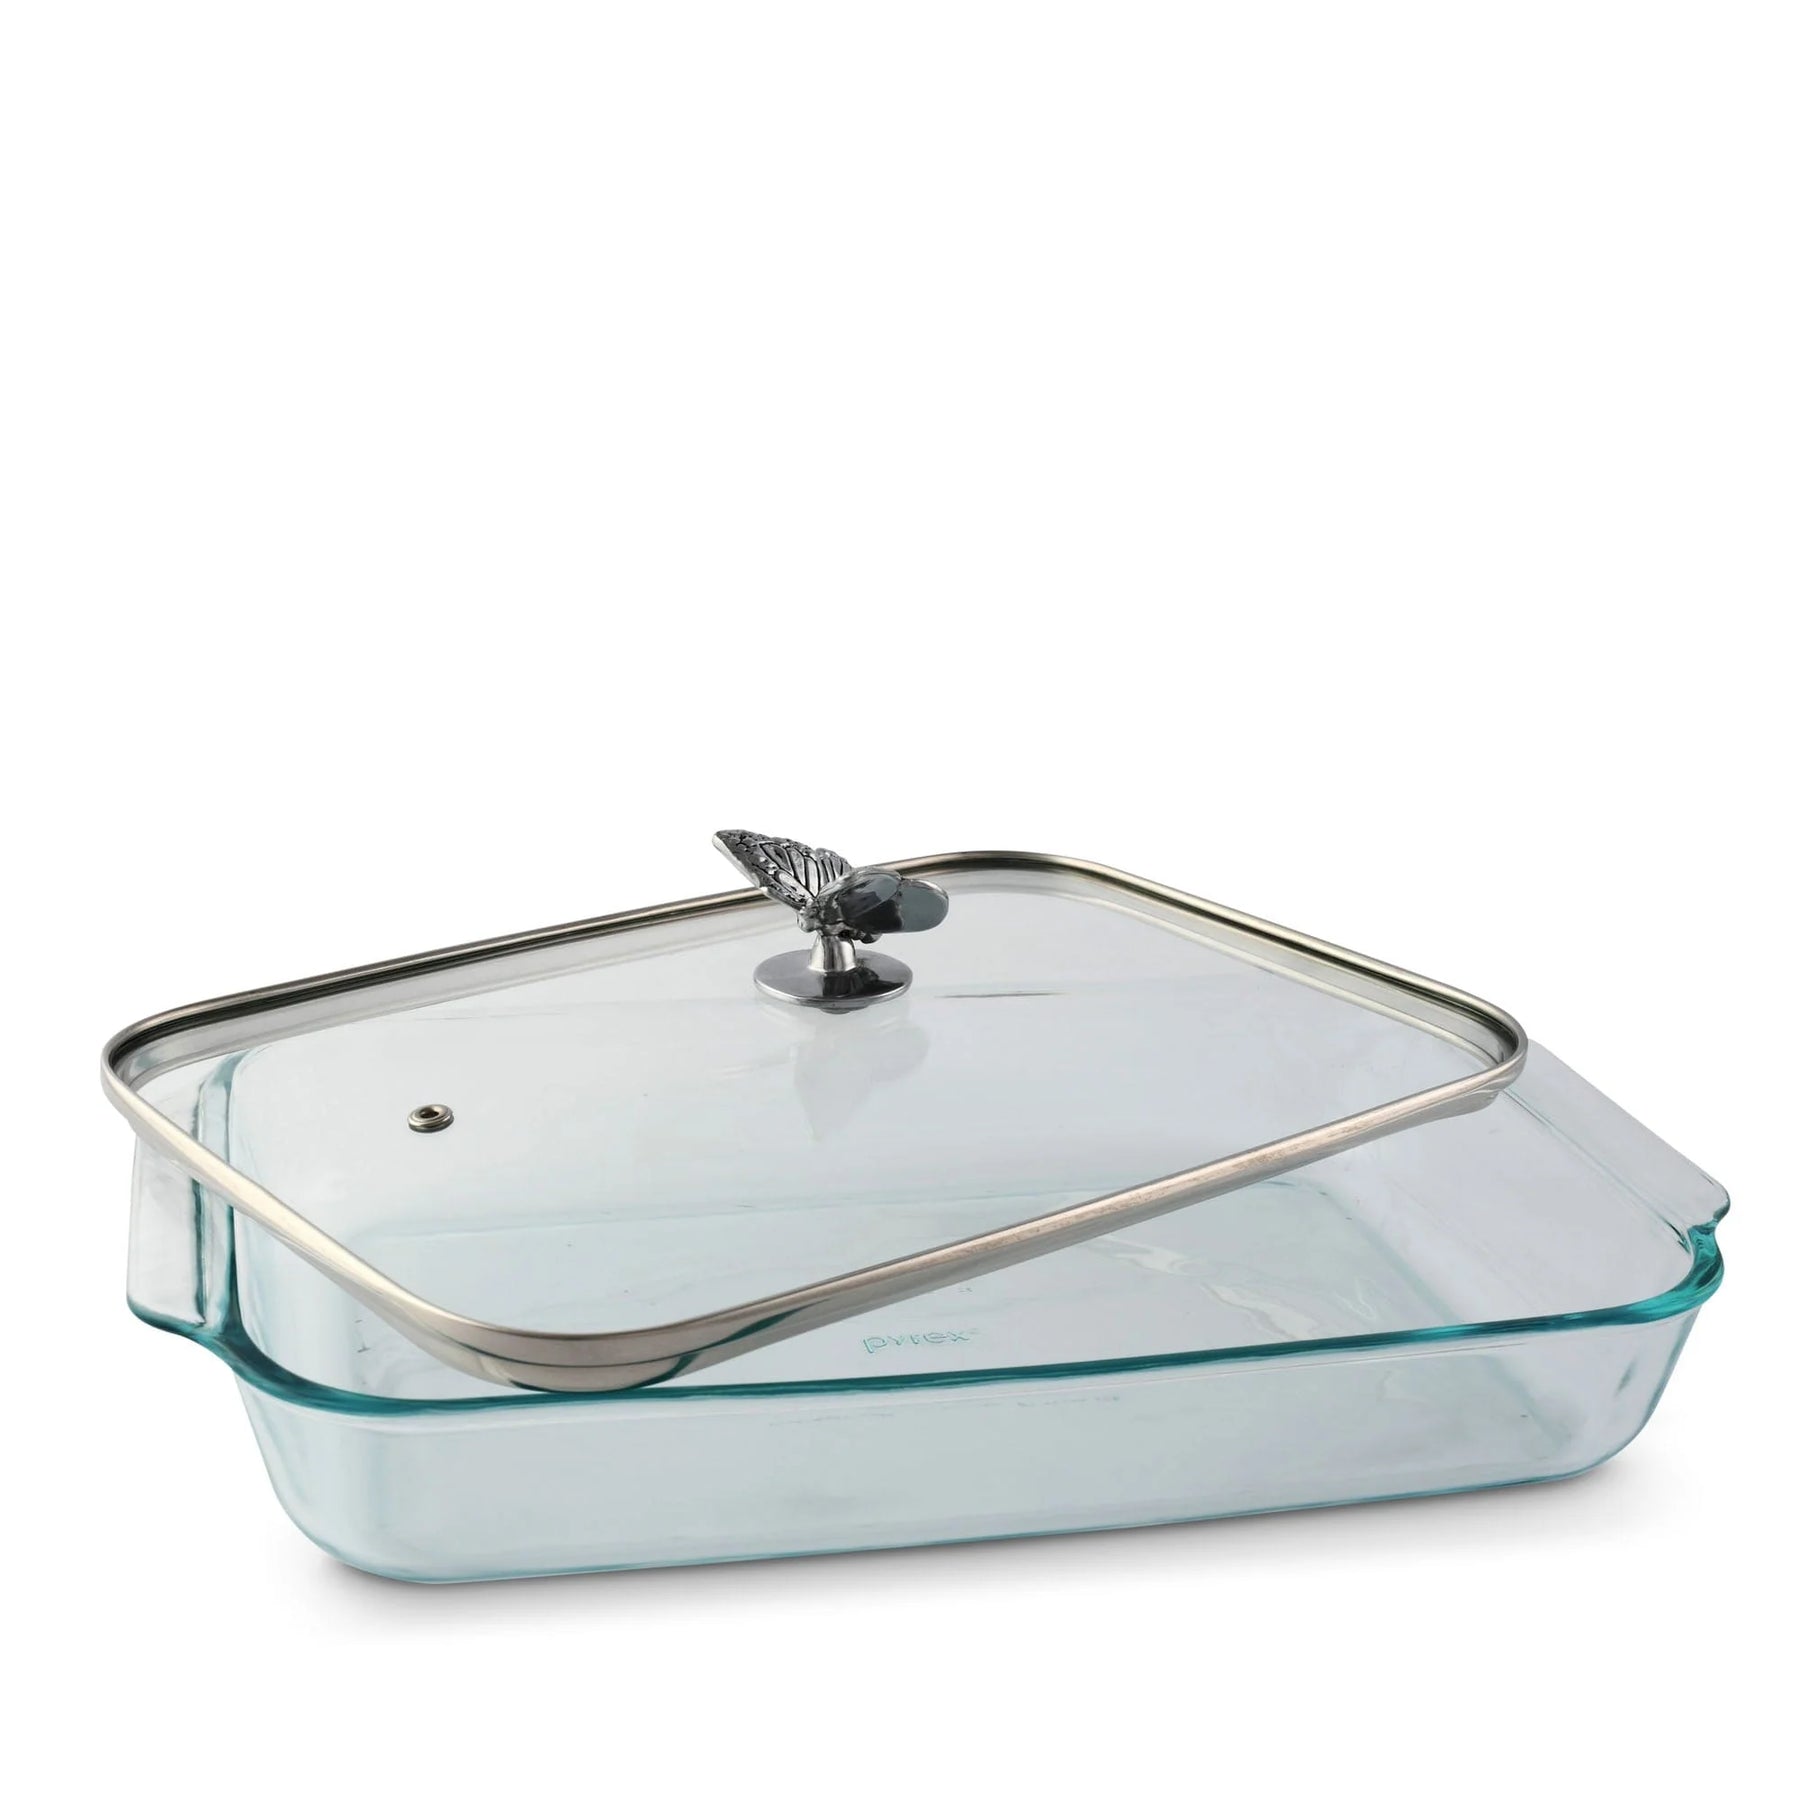 Pyrex 3 Quart Baking Dish with Butterfly Lid